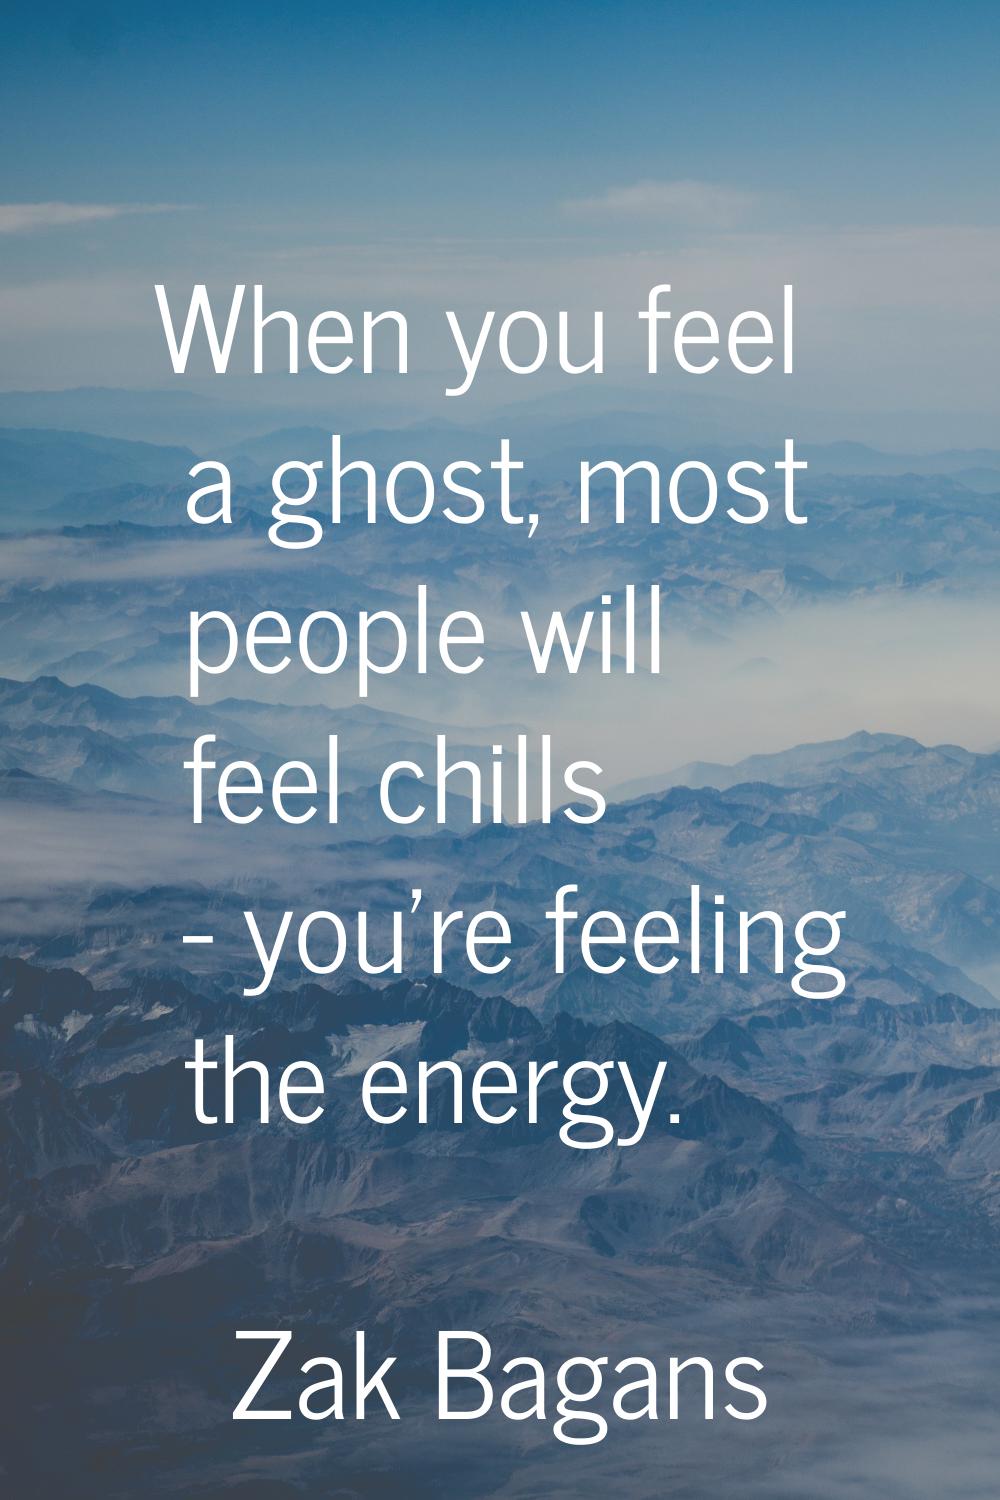 When you feel a ghost, most people will feel chills - you're feeling the energy.